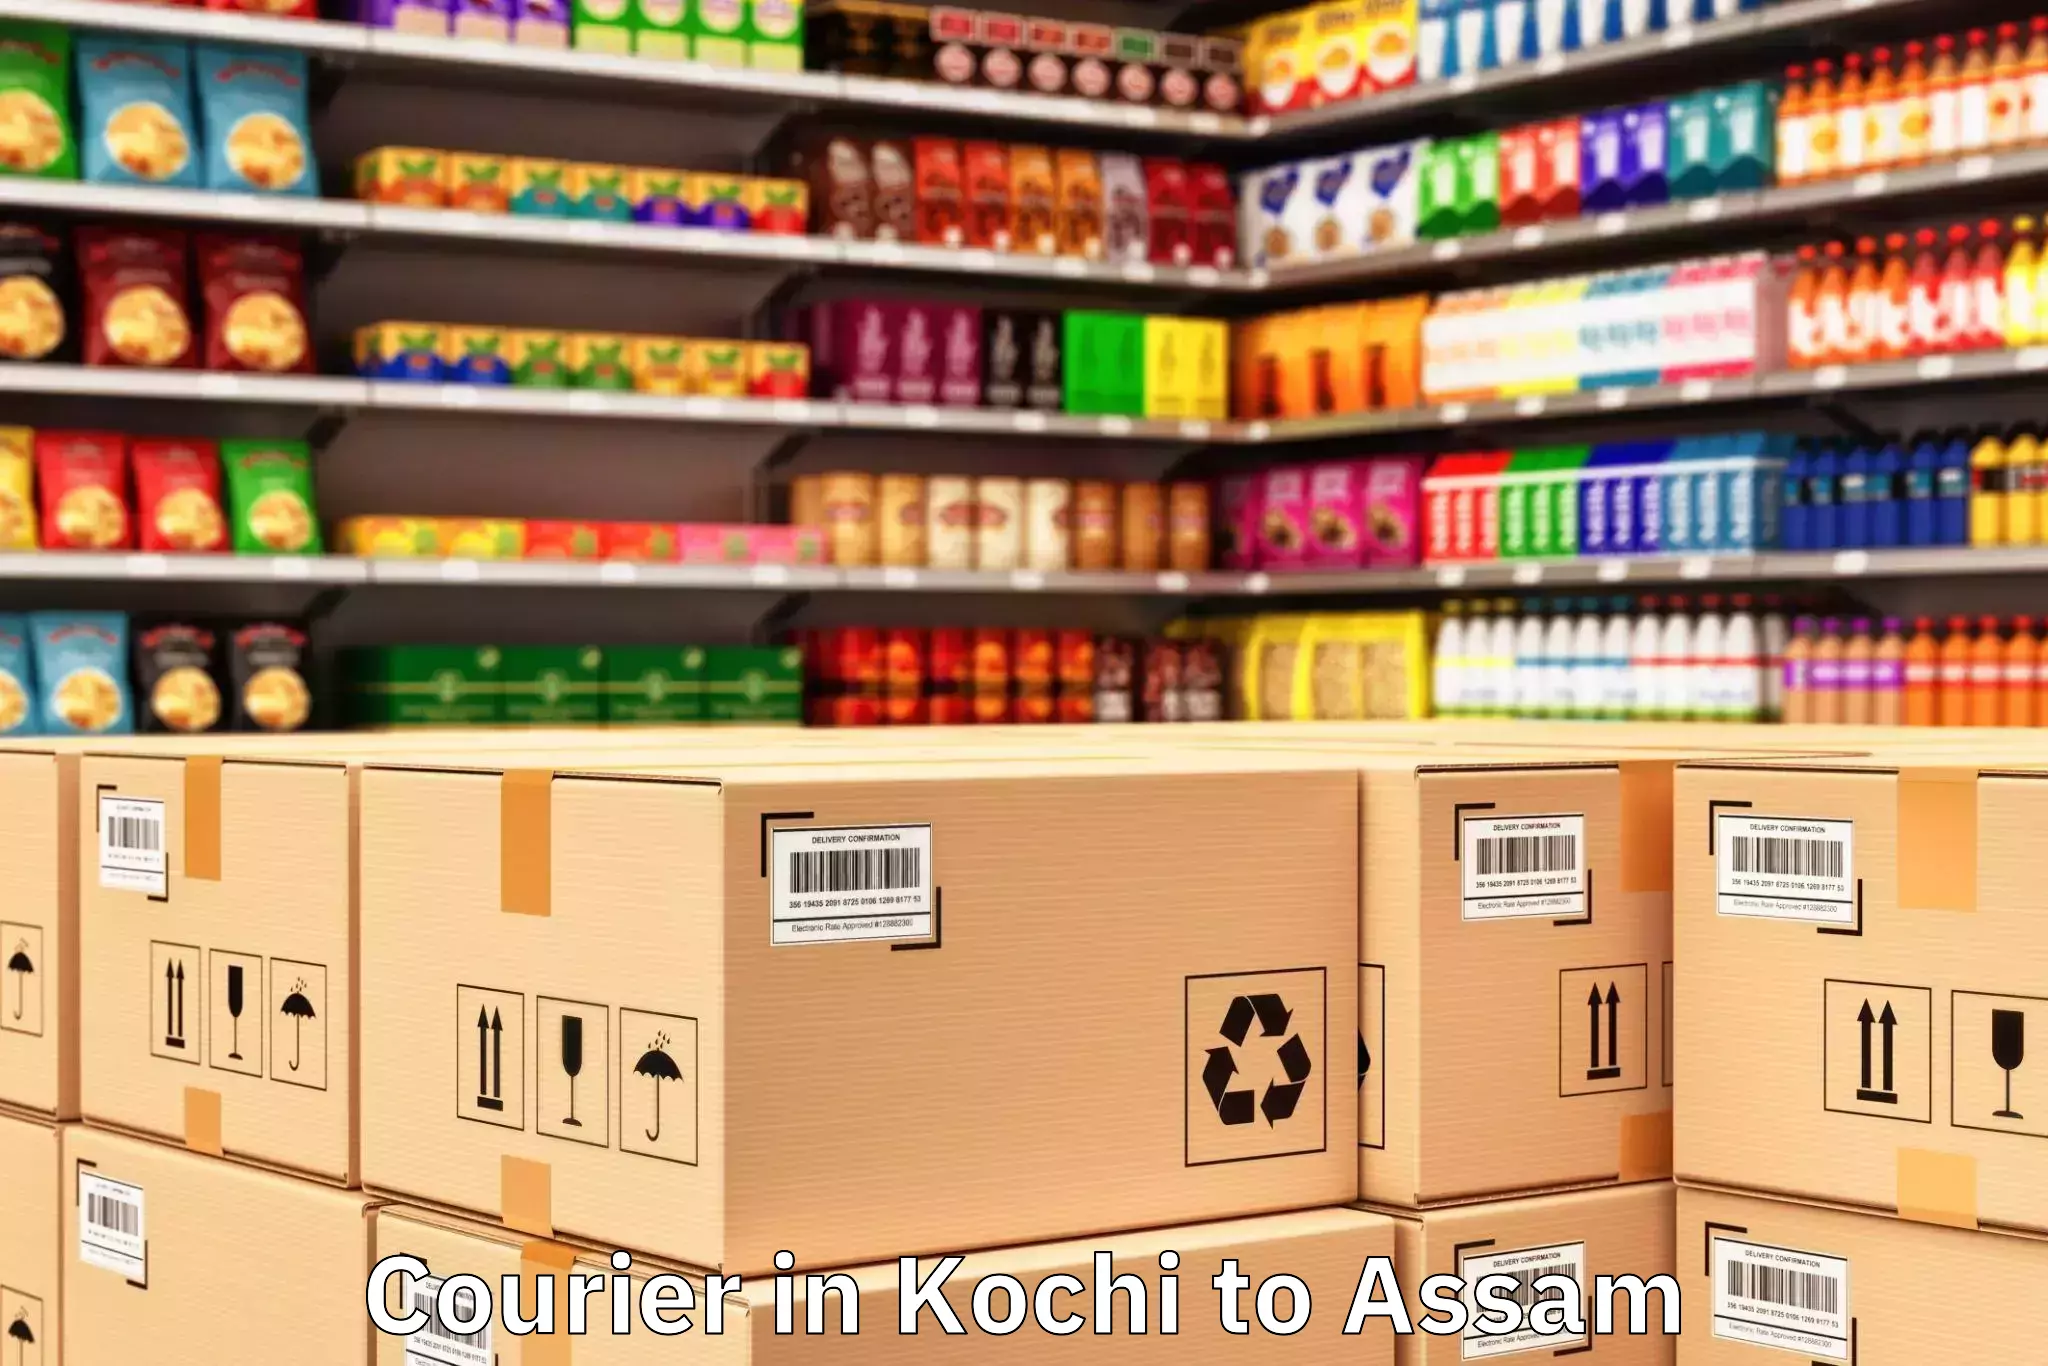 Trusted Kochi to Dibrugarh University Courier